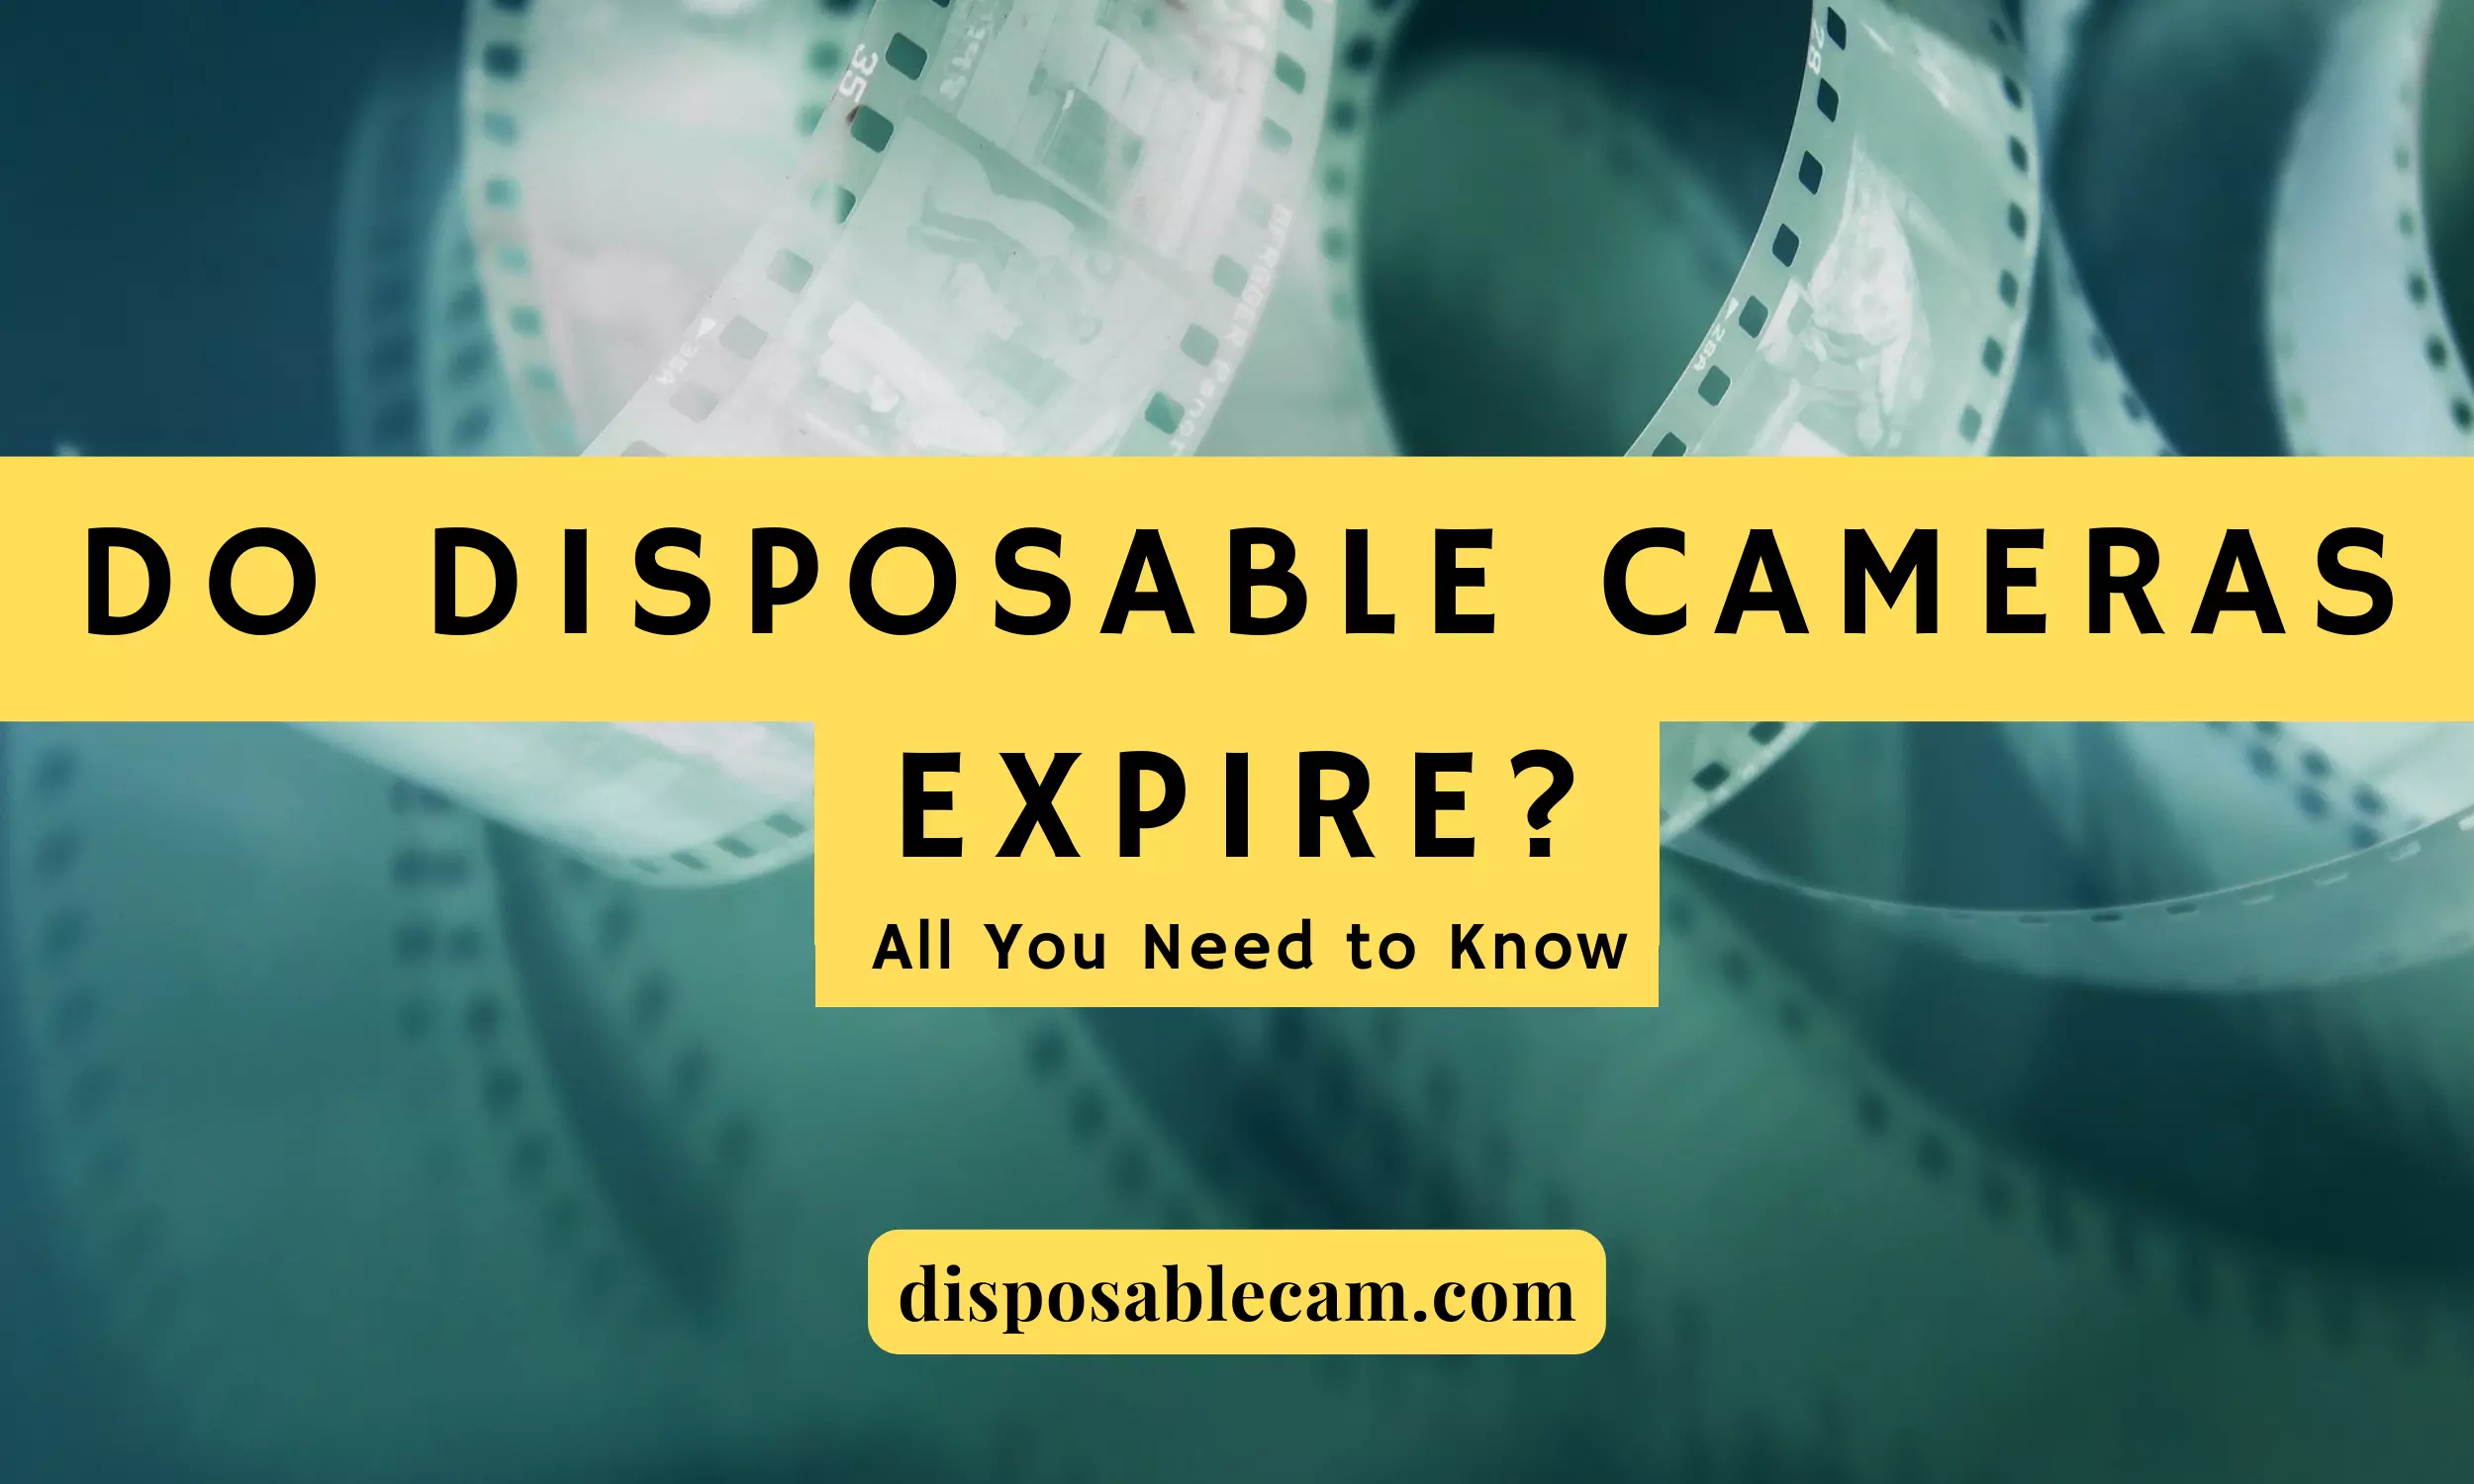 do disposable cameras expire? All you need to know